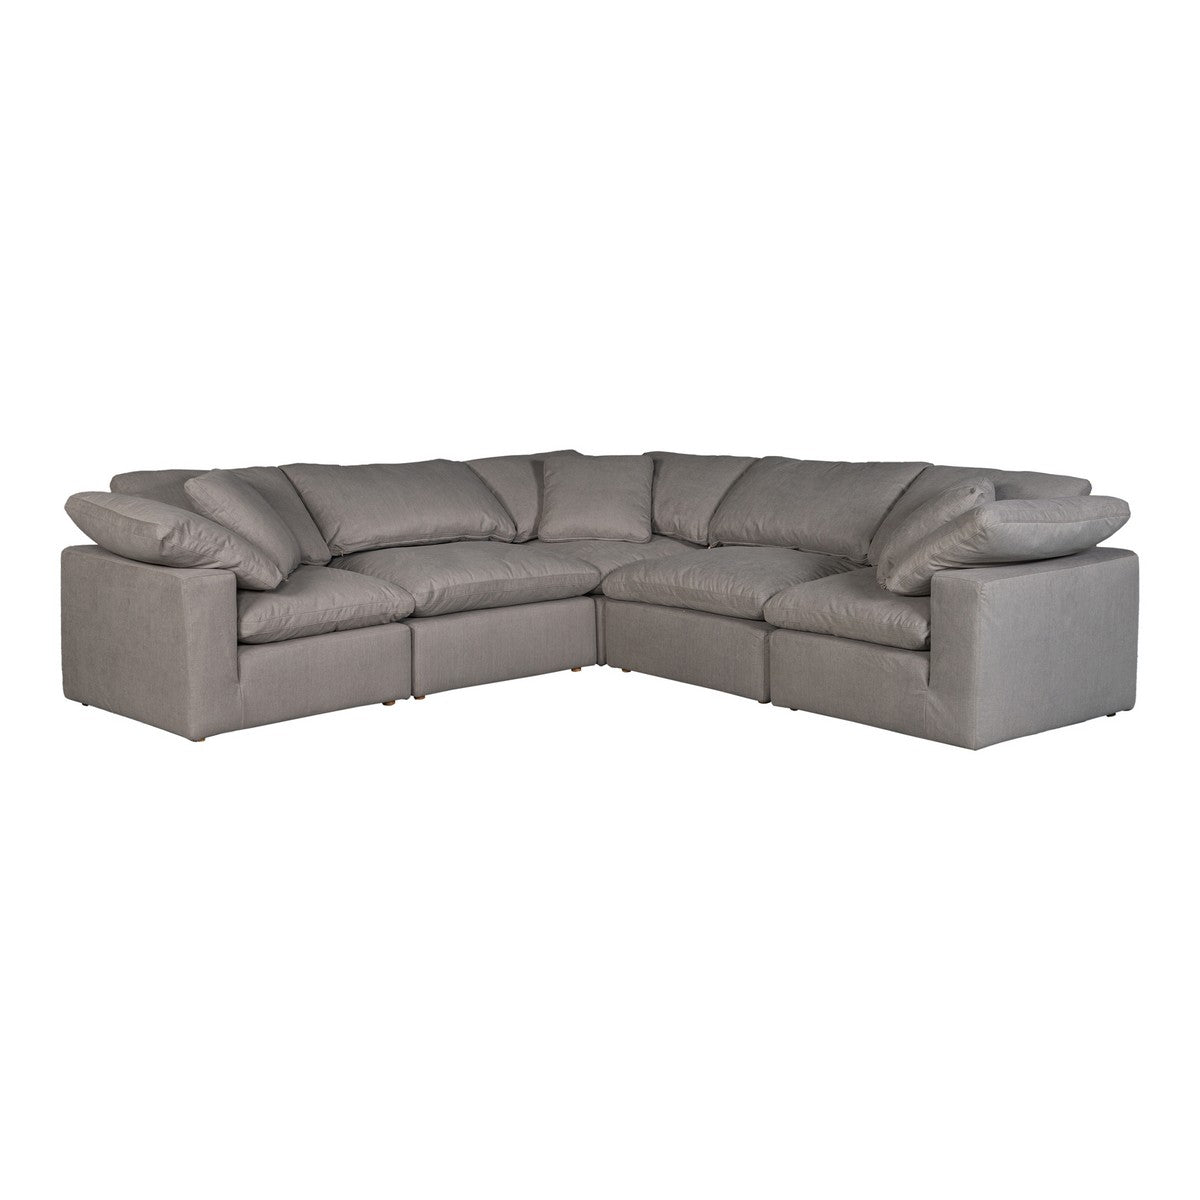 Moe's Home Collection Clay Classic L Modular Sectional Livesmart Fabric Light Grey - YJ-1010-29 - Moe's Home Collection - Extras - Minimal And Modern - 1